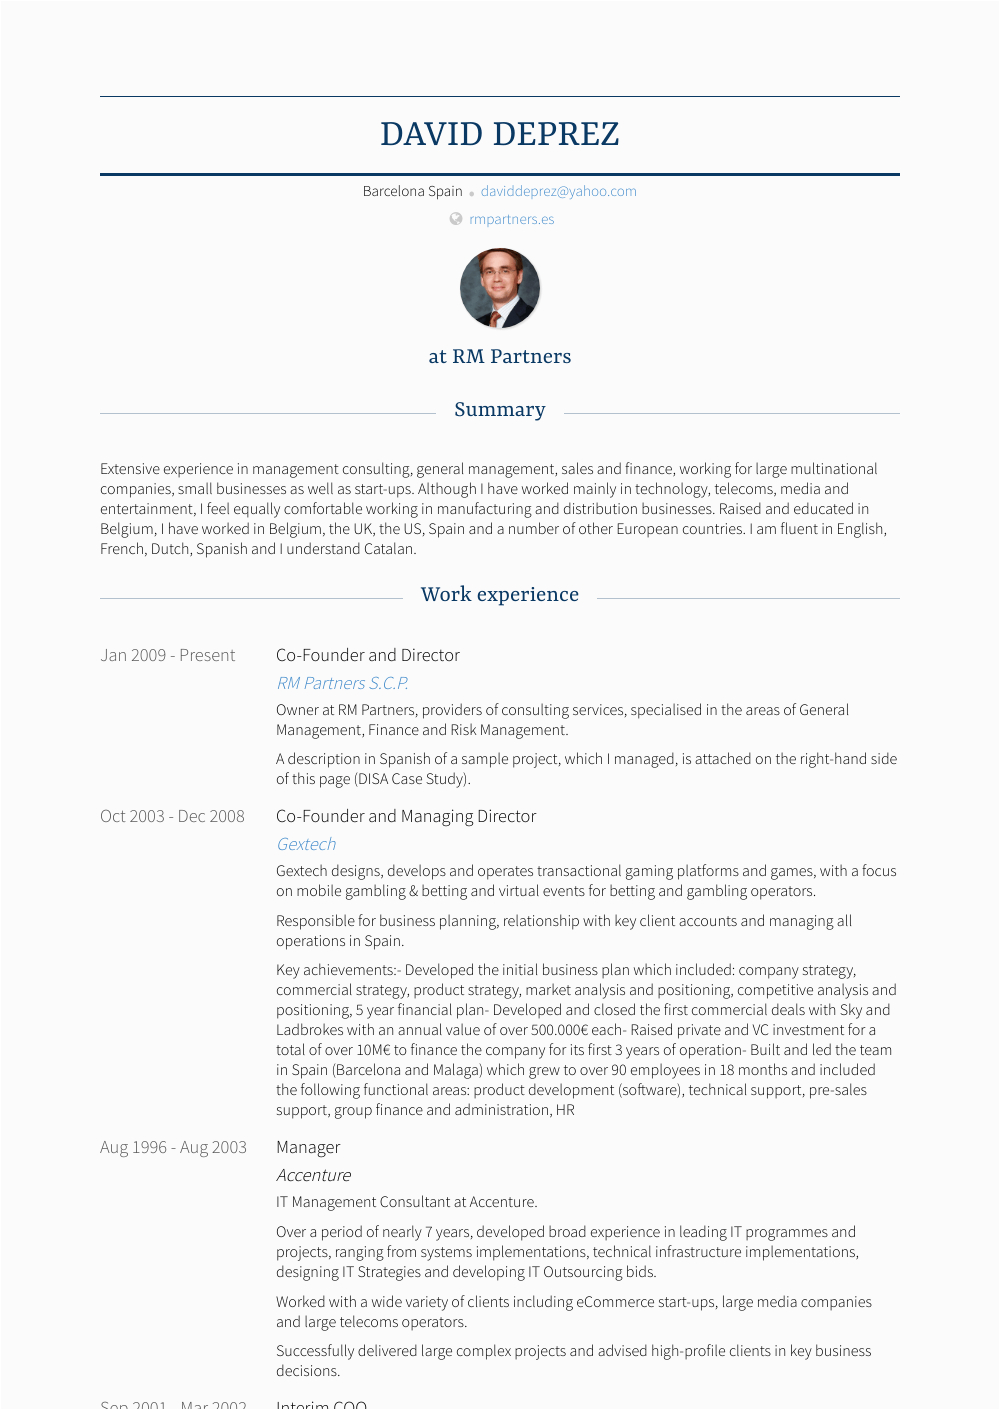 Sample Resume Of A Co Founder Co Founder and Director Resume Samples and Templates